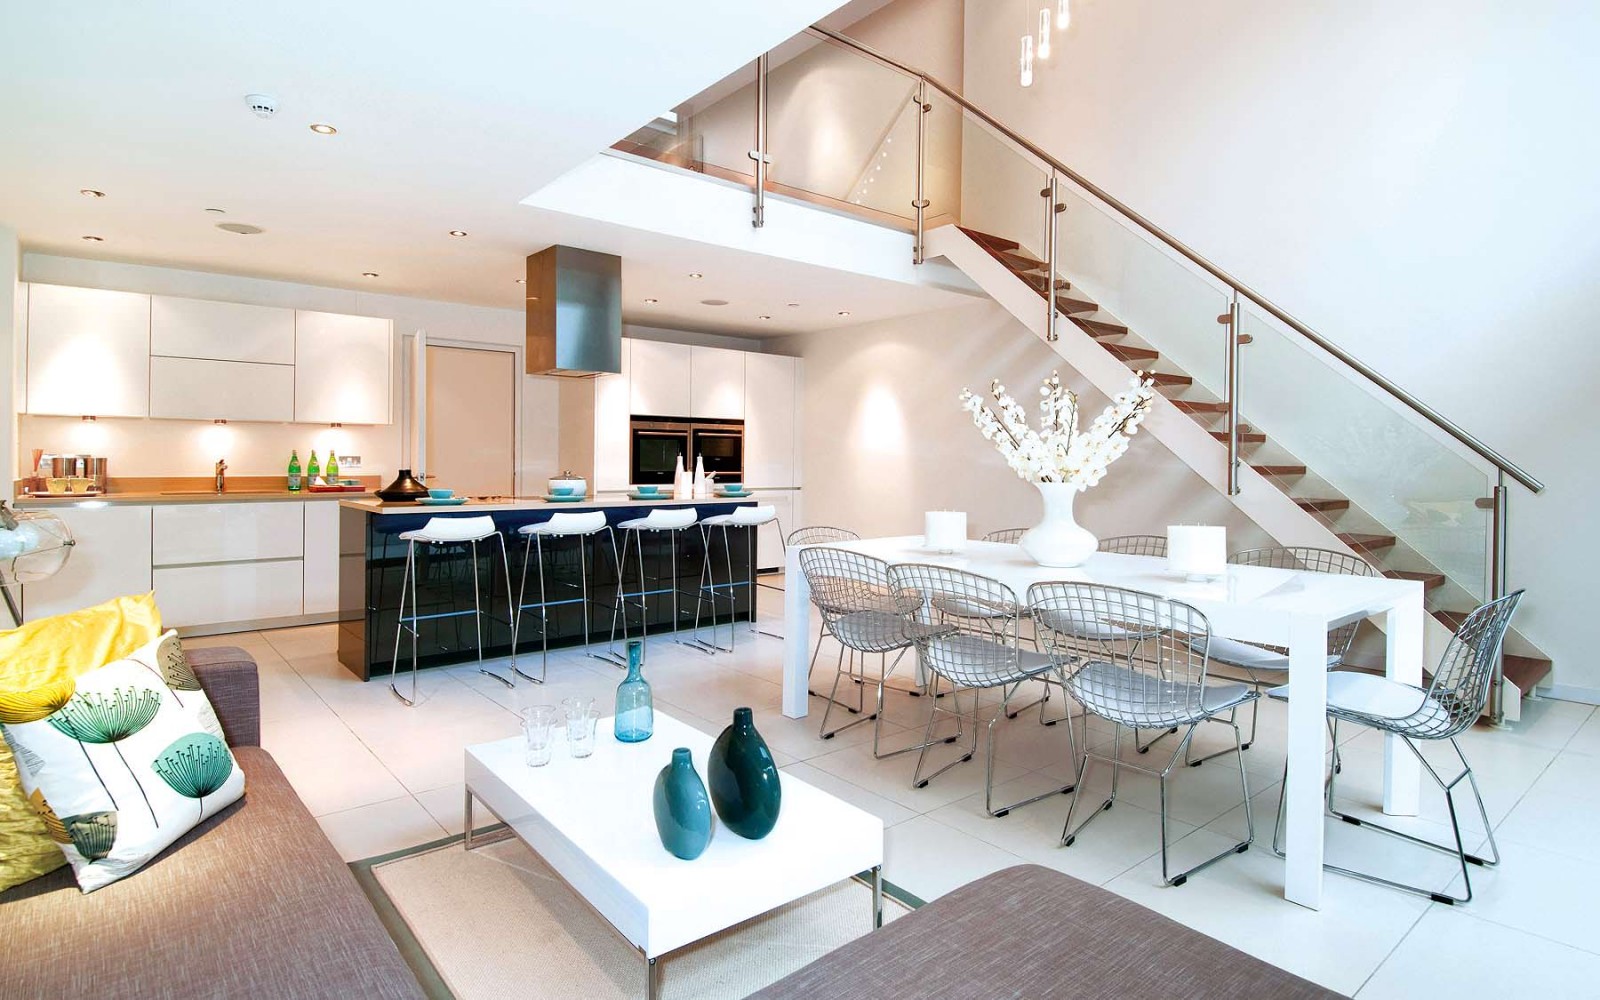 A modern kitchen and dining area with an open floor plan featuring a staircase.